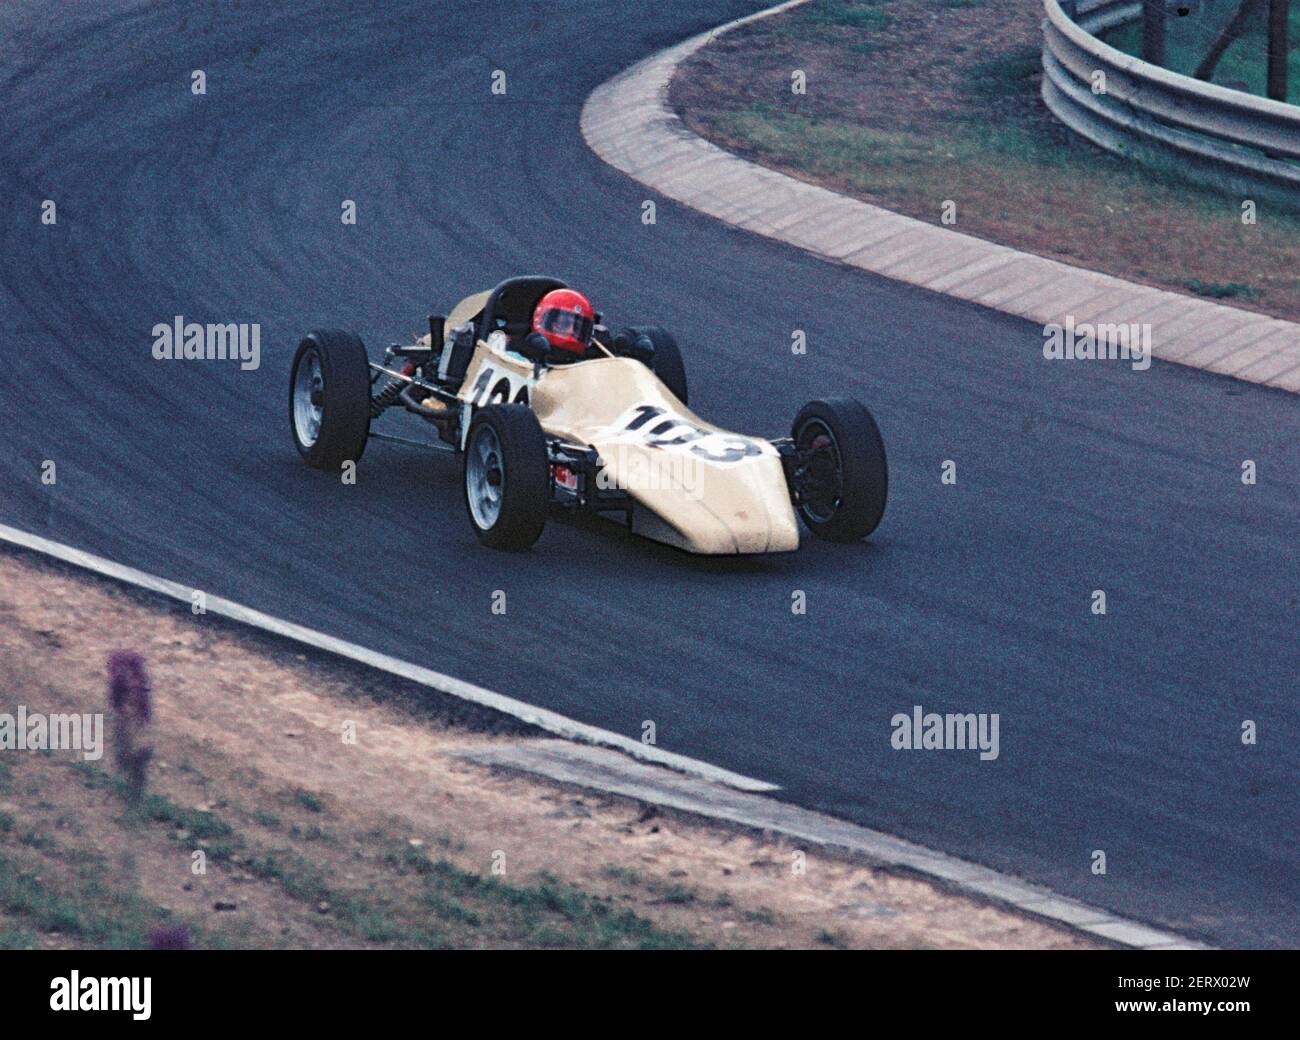 An open-wheel single-seater Formula Vee racing car at the Nurburgring race track in the 1970s, Eifel, Germany Stock Photo